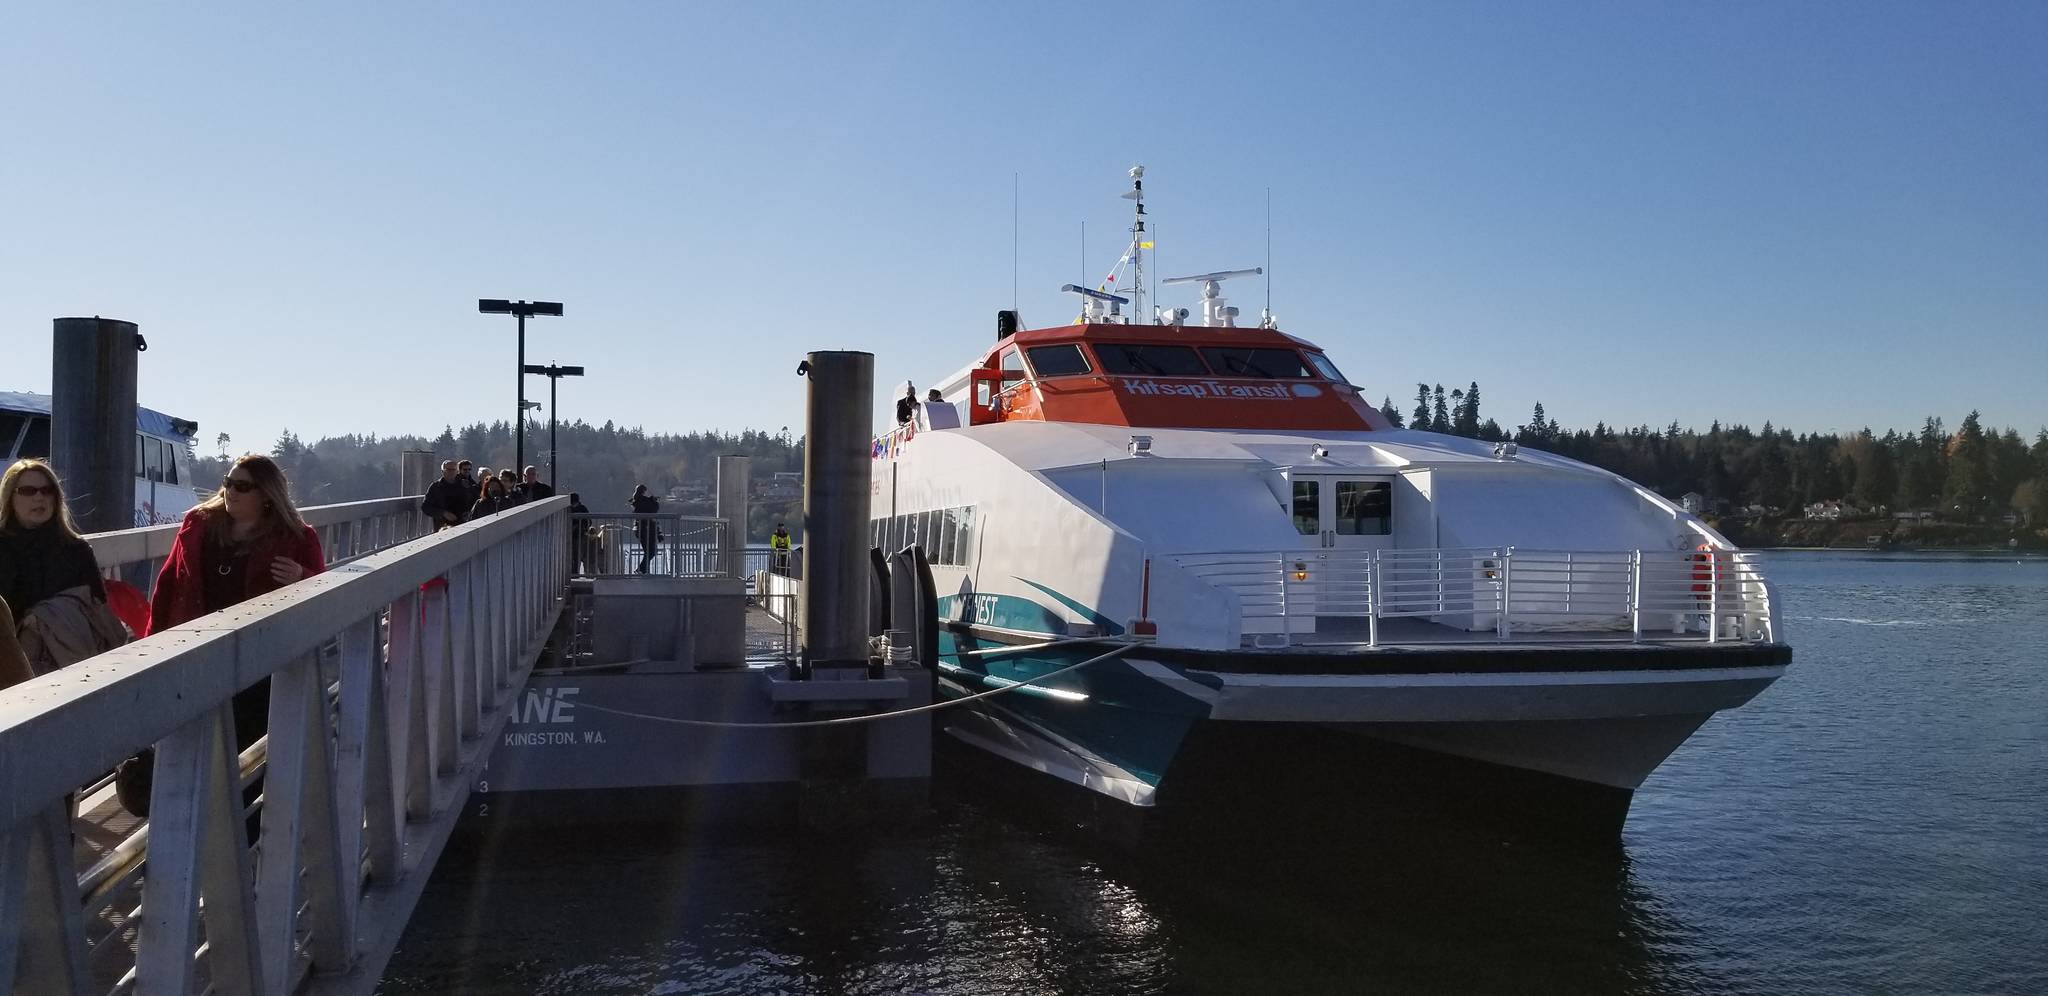 Kitsap Transit’s M/V Finest will have a special “Finest Friday” sailing schedule on Nov. 23. Nick Twietmeyer | Kitsap news Group.